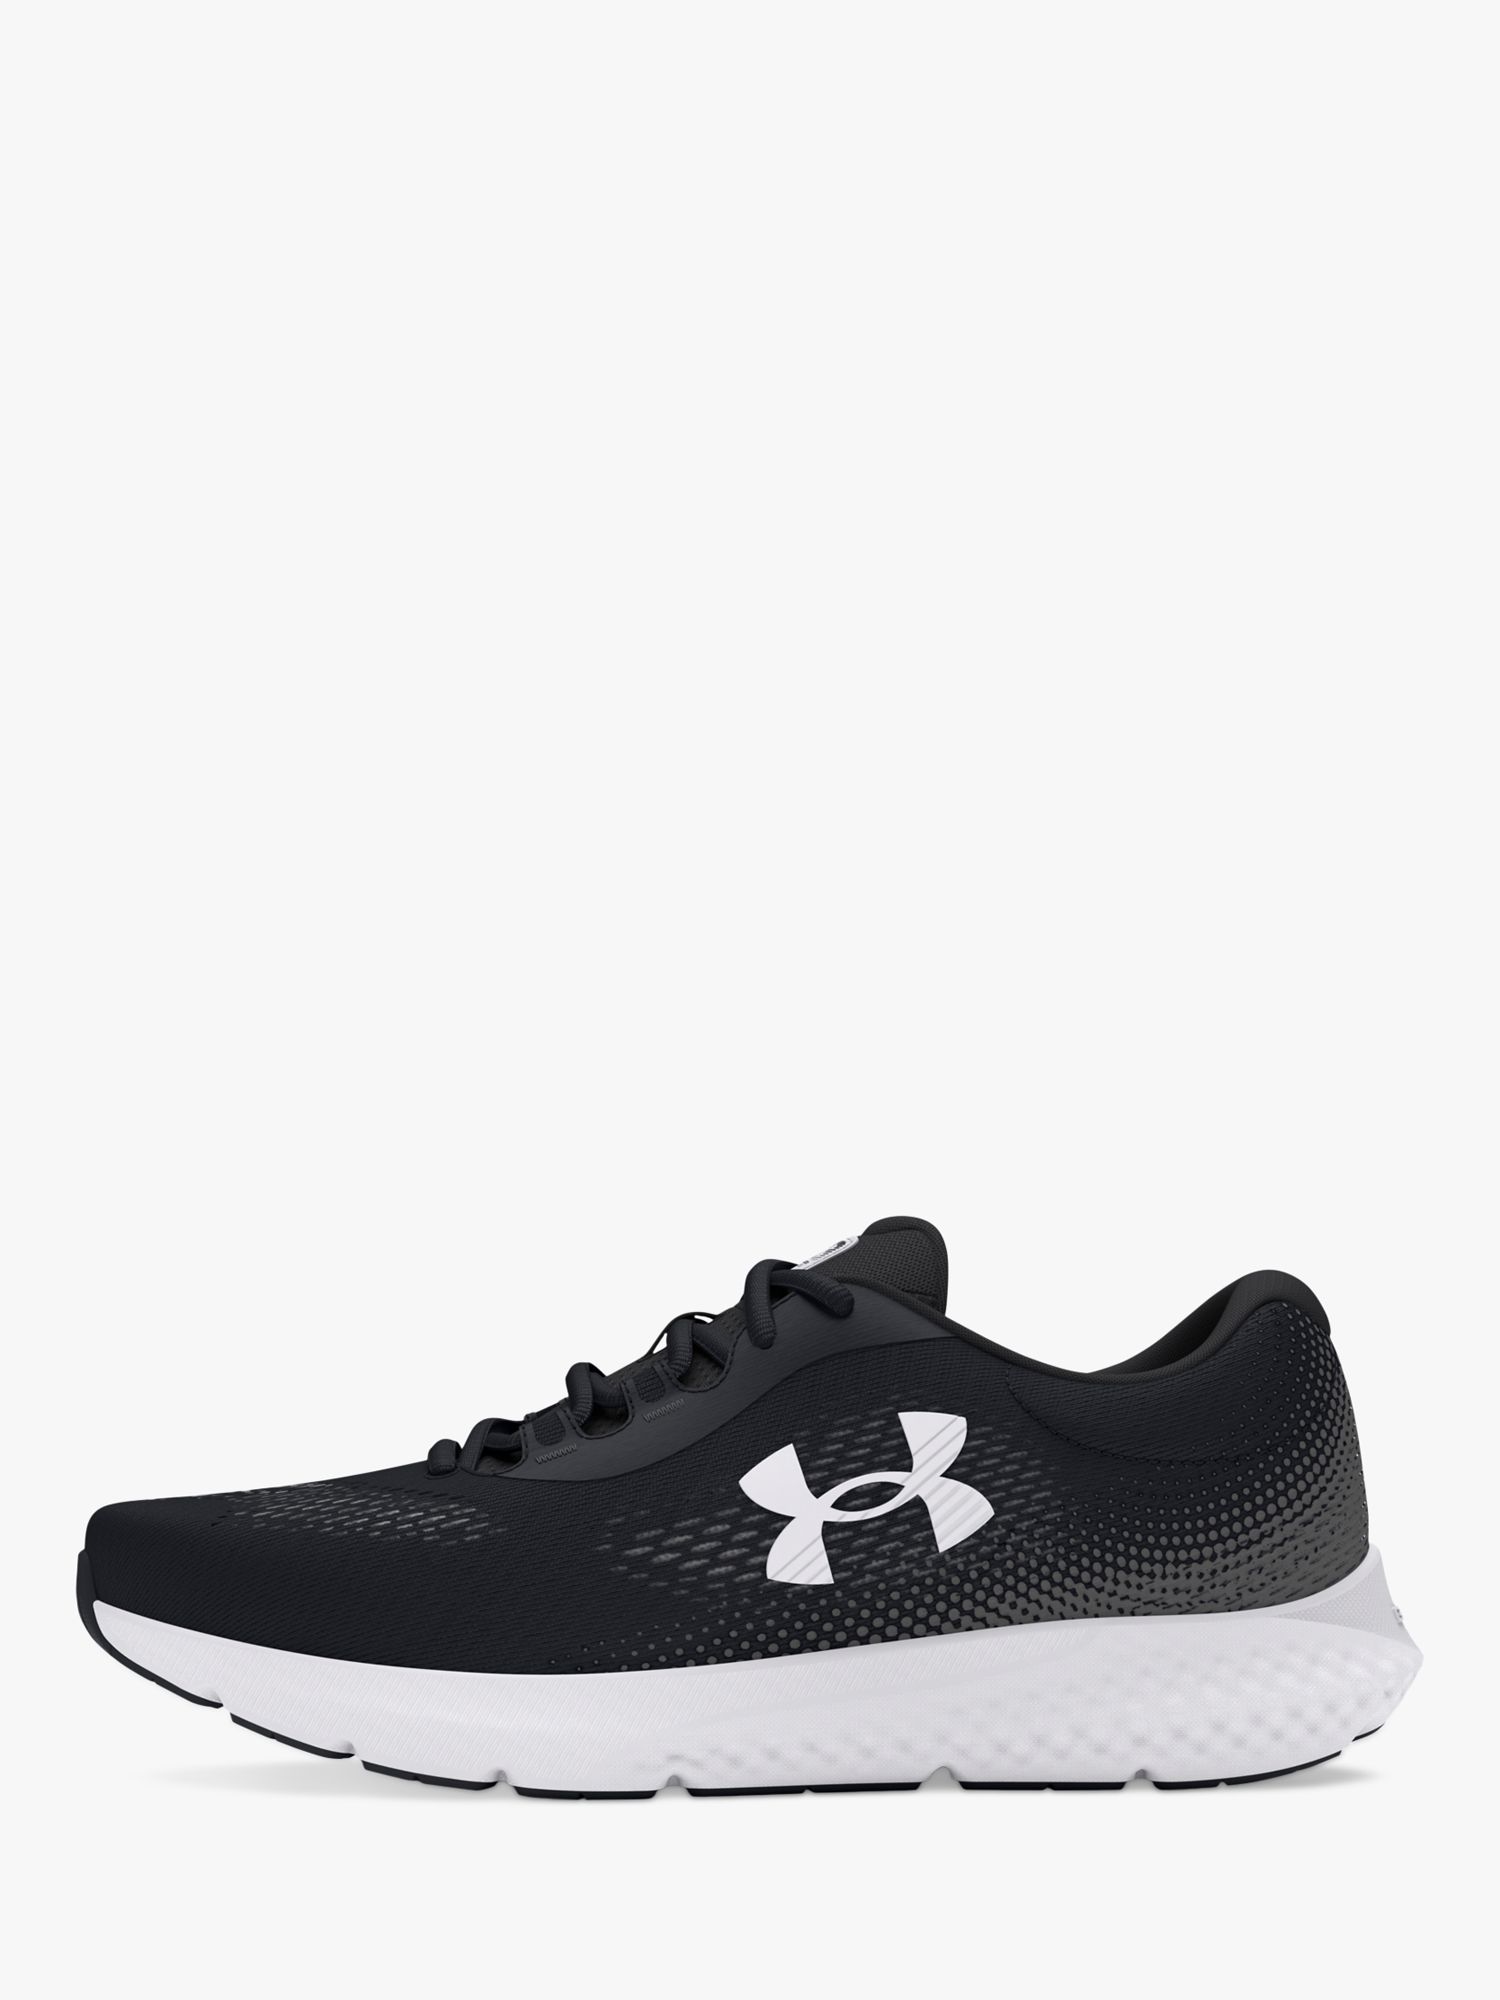 Buy Under Armour Rogue 4 Men's Running Shoes Online at johnlewis.com